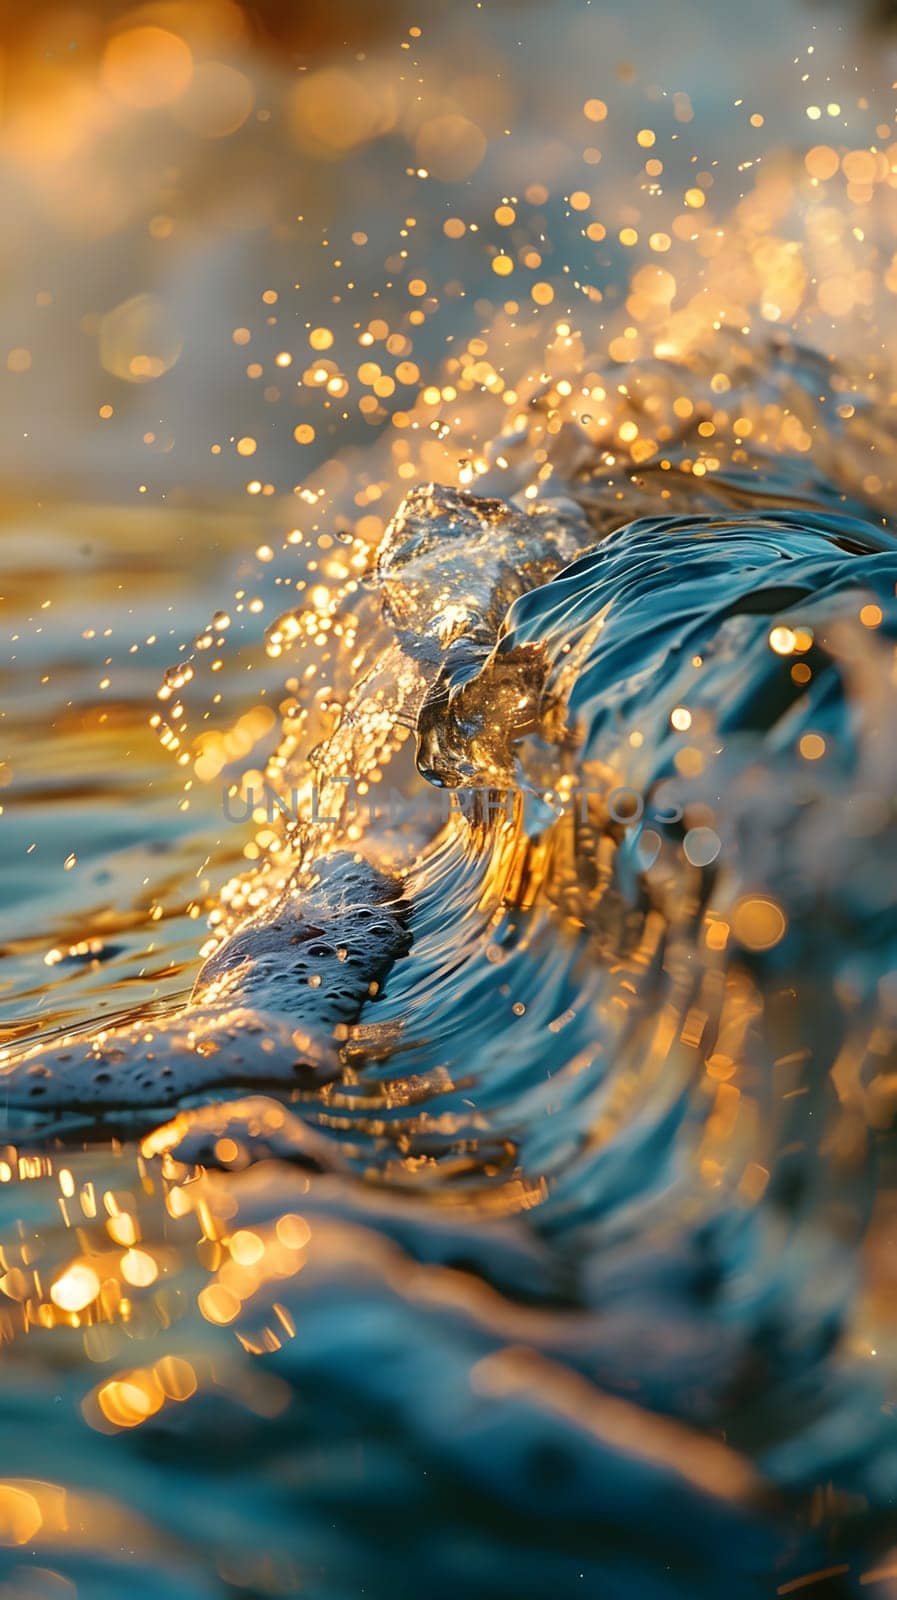 A close up of a wind wave in the ocean at sunset, displaying a beautiful pattern of electric blue liquid water. A stunning natural landscape art